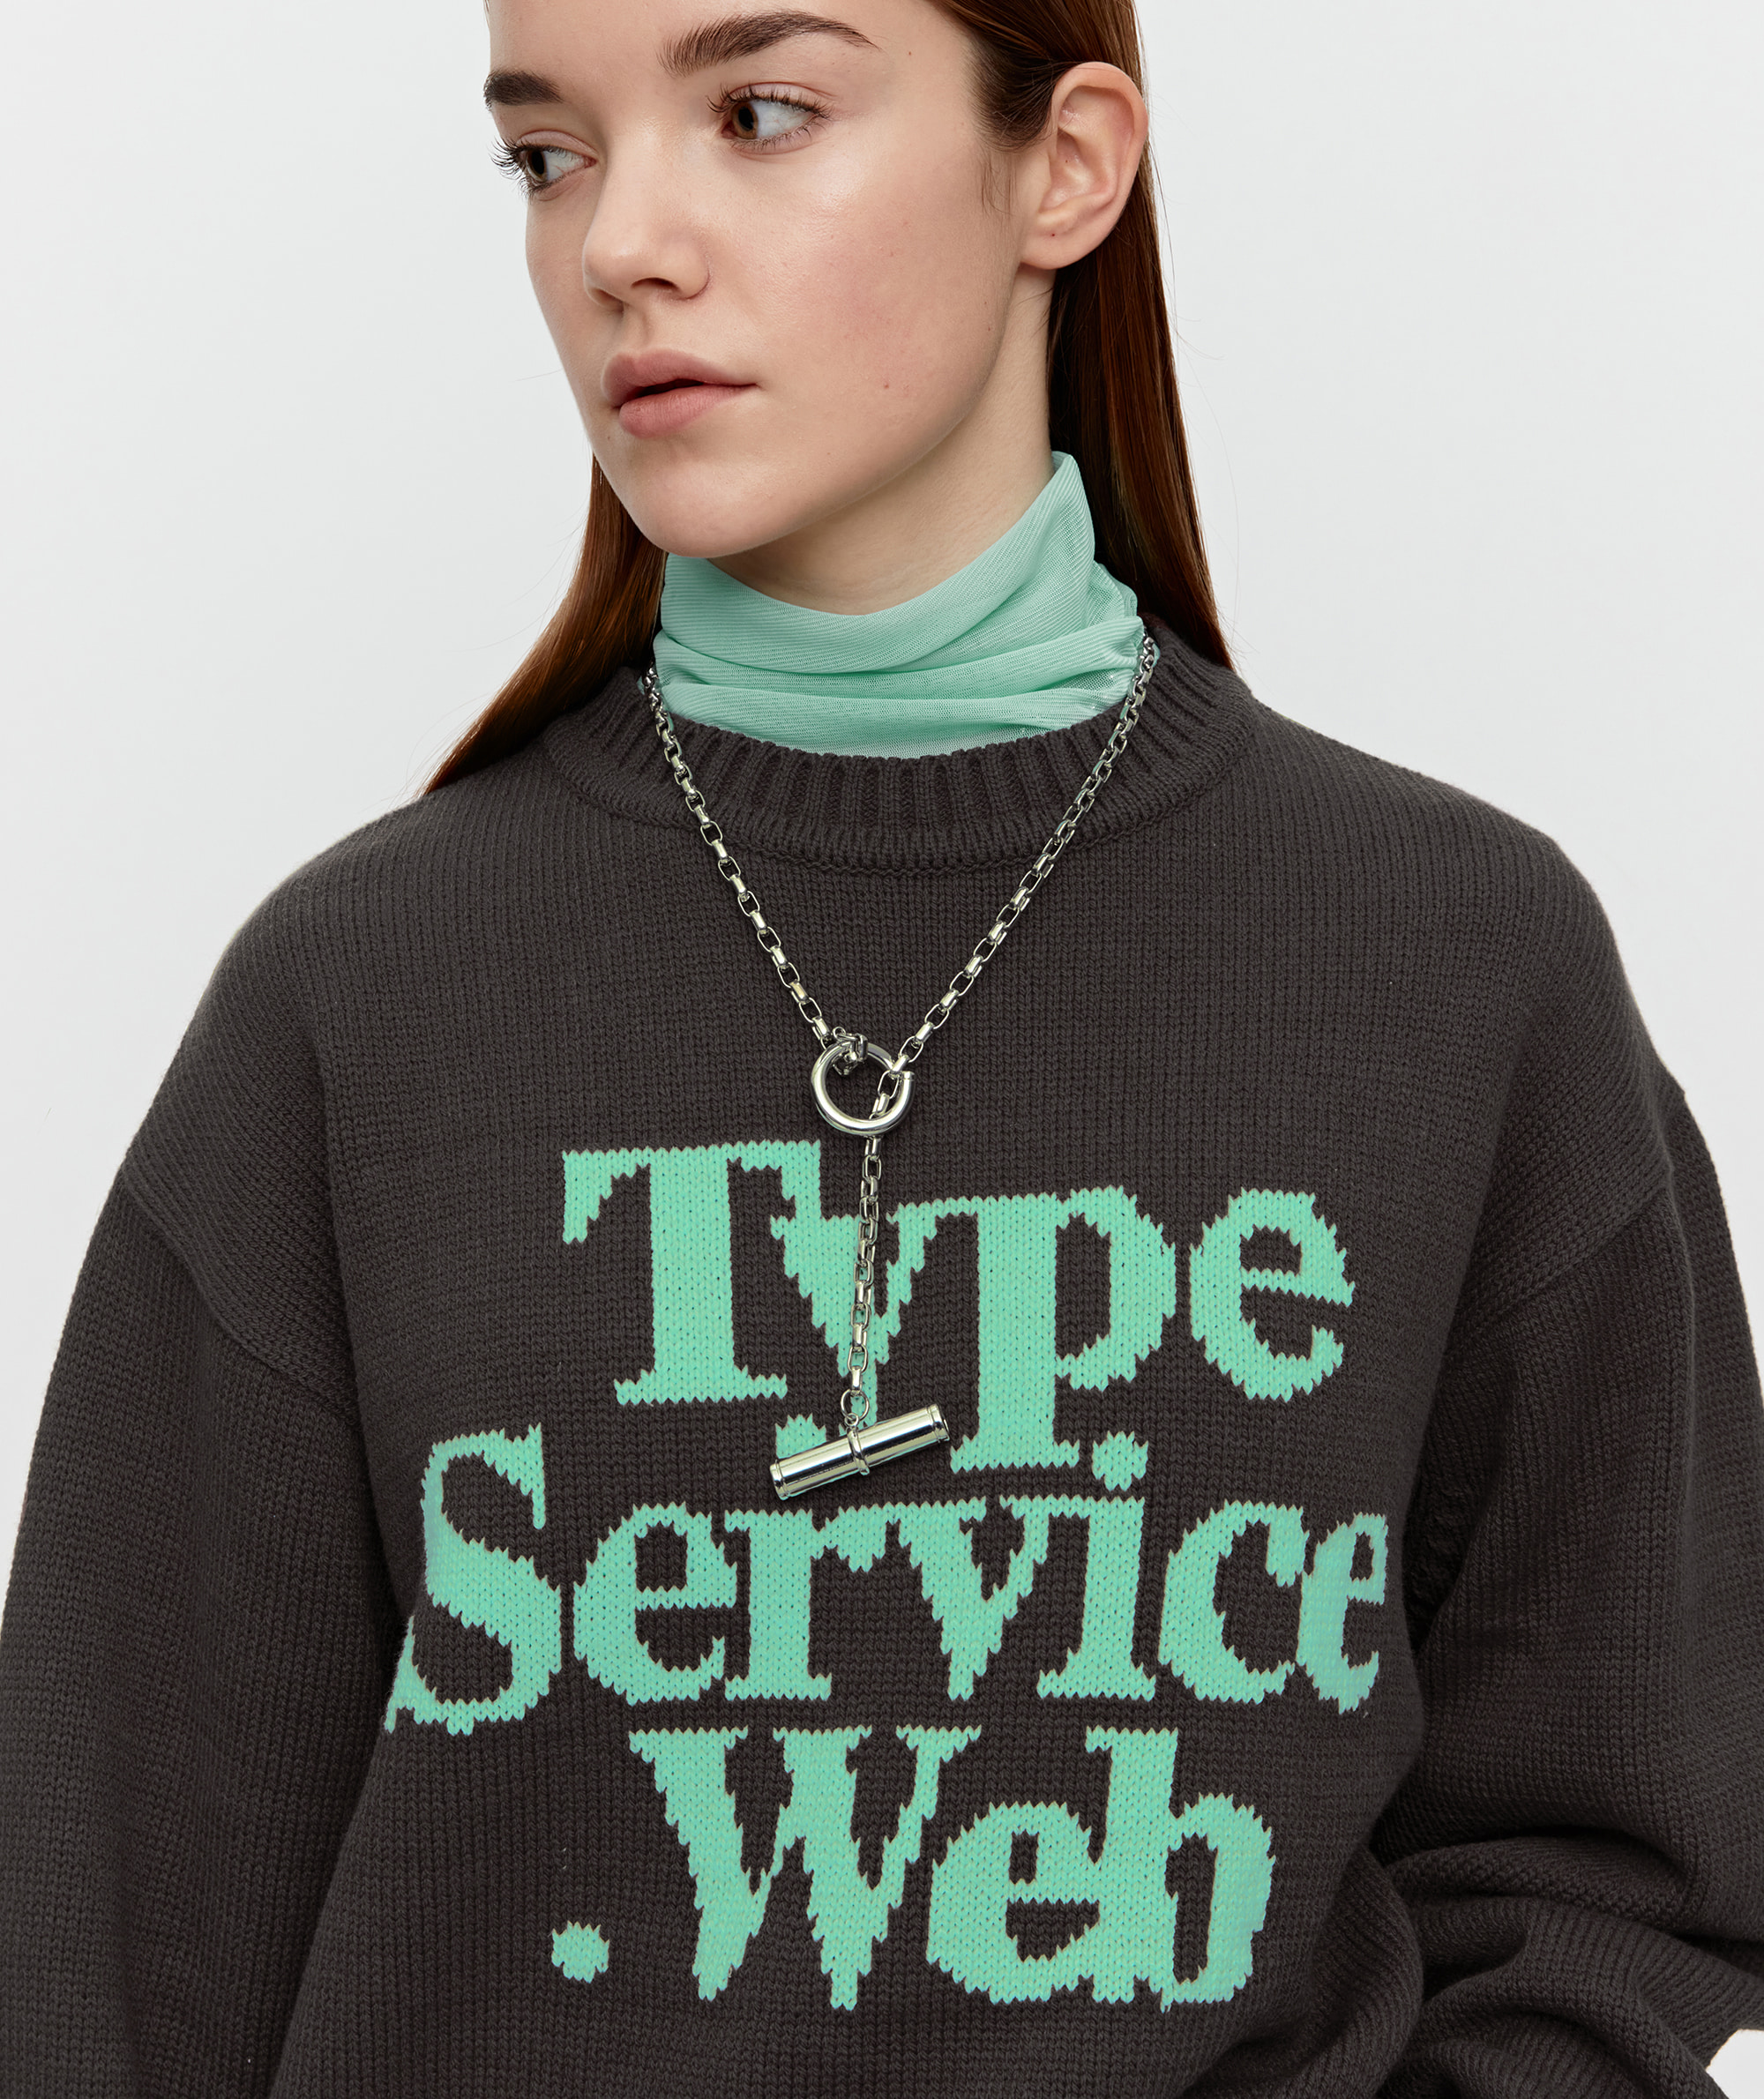 Typeservice Web Knit [Brown]